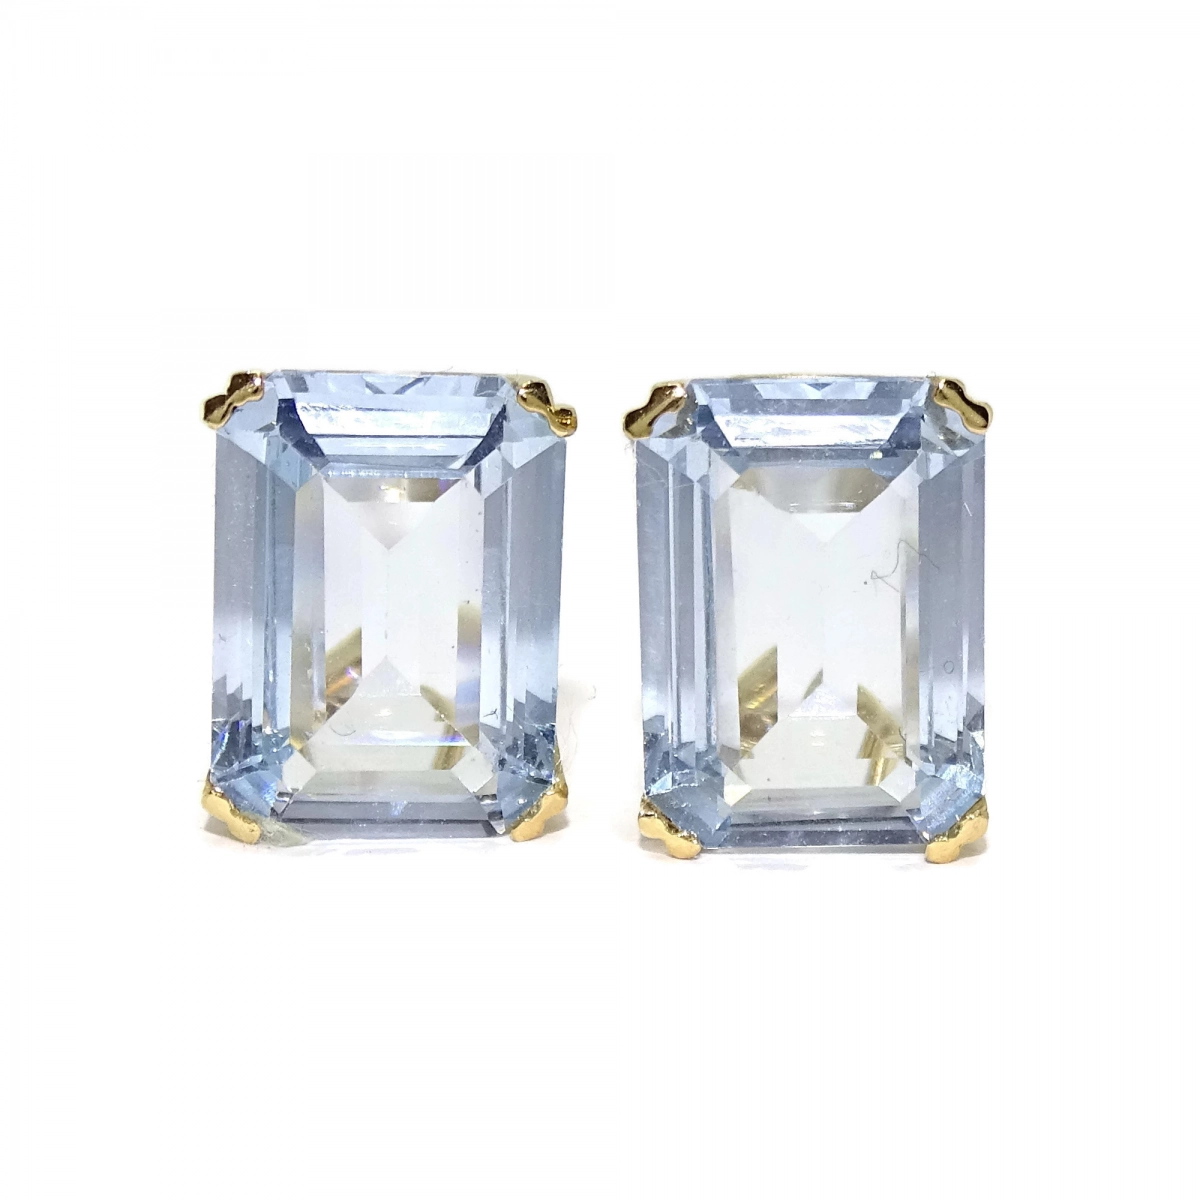 EARRINGS OF YELLOW GOLD OF 18KTES WITH 2 ZIRCONS BLUE 1.4 CM HIGH BY 1.00 INCHES WIDE Never say never